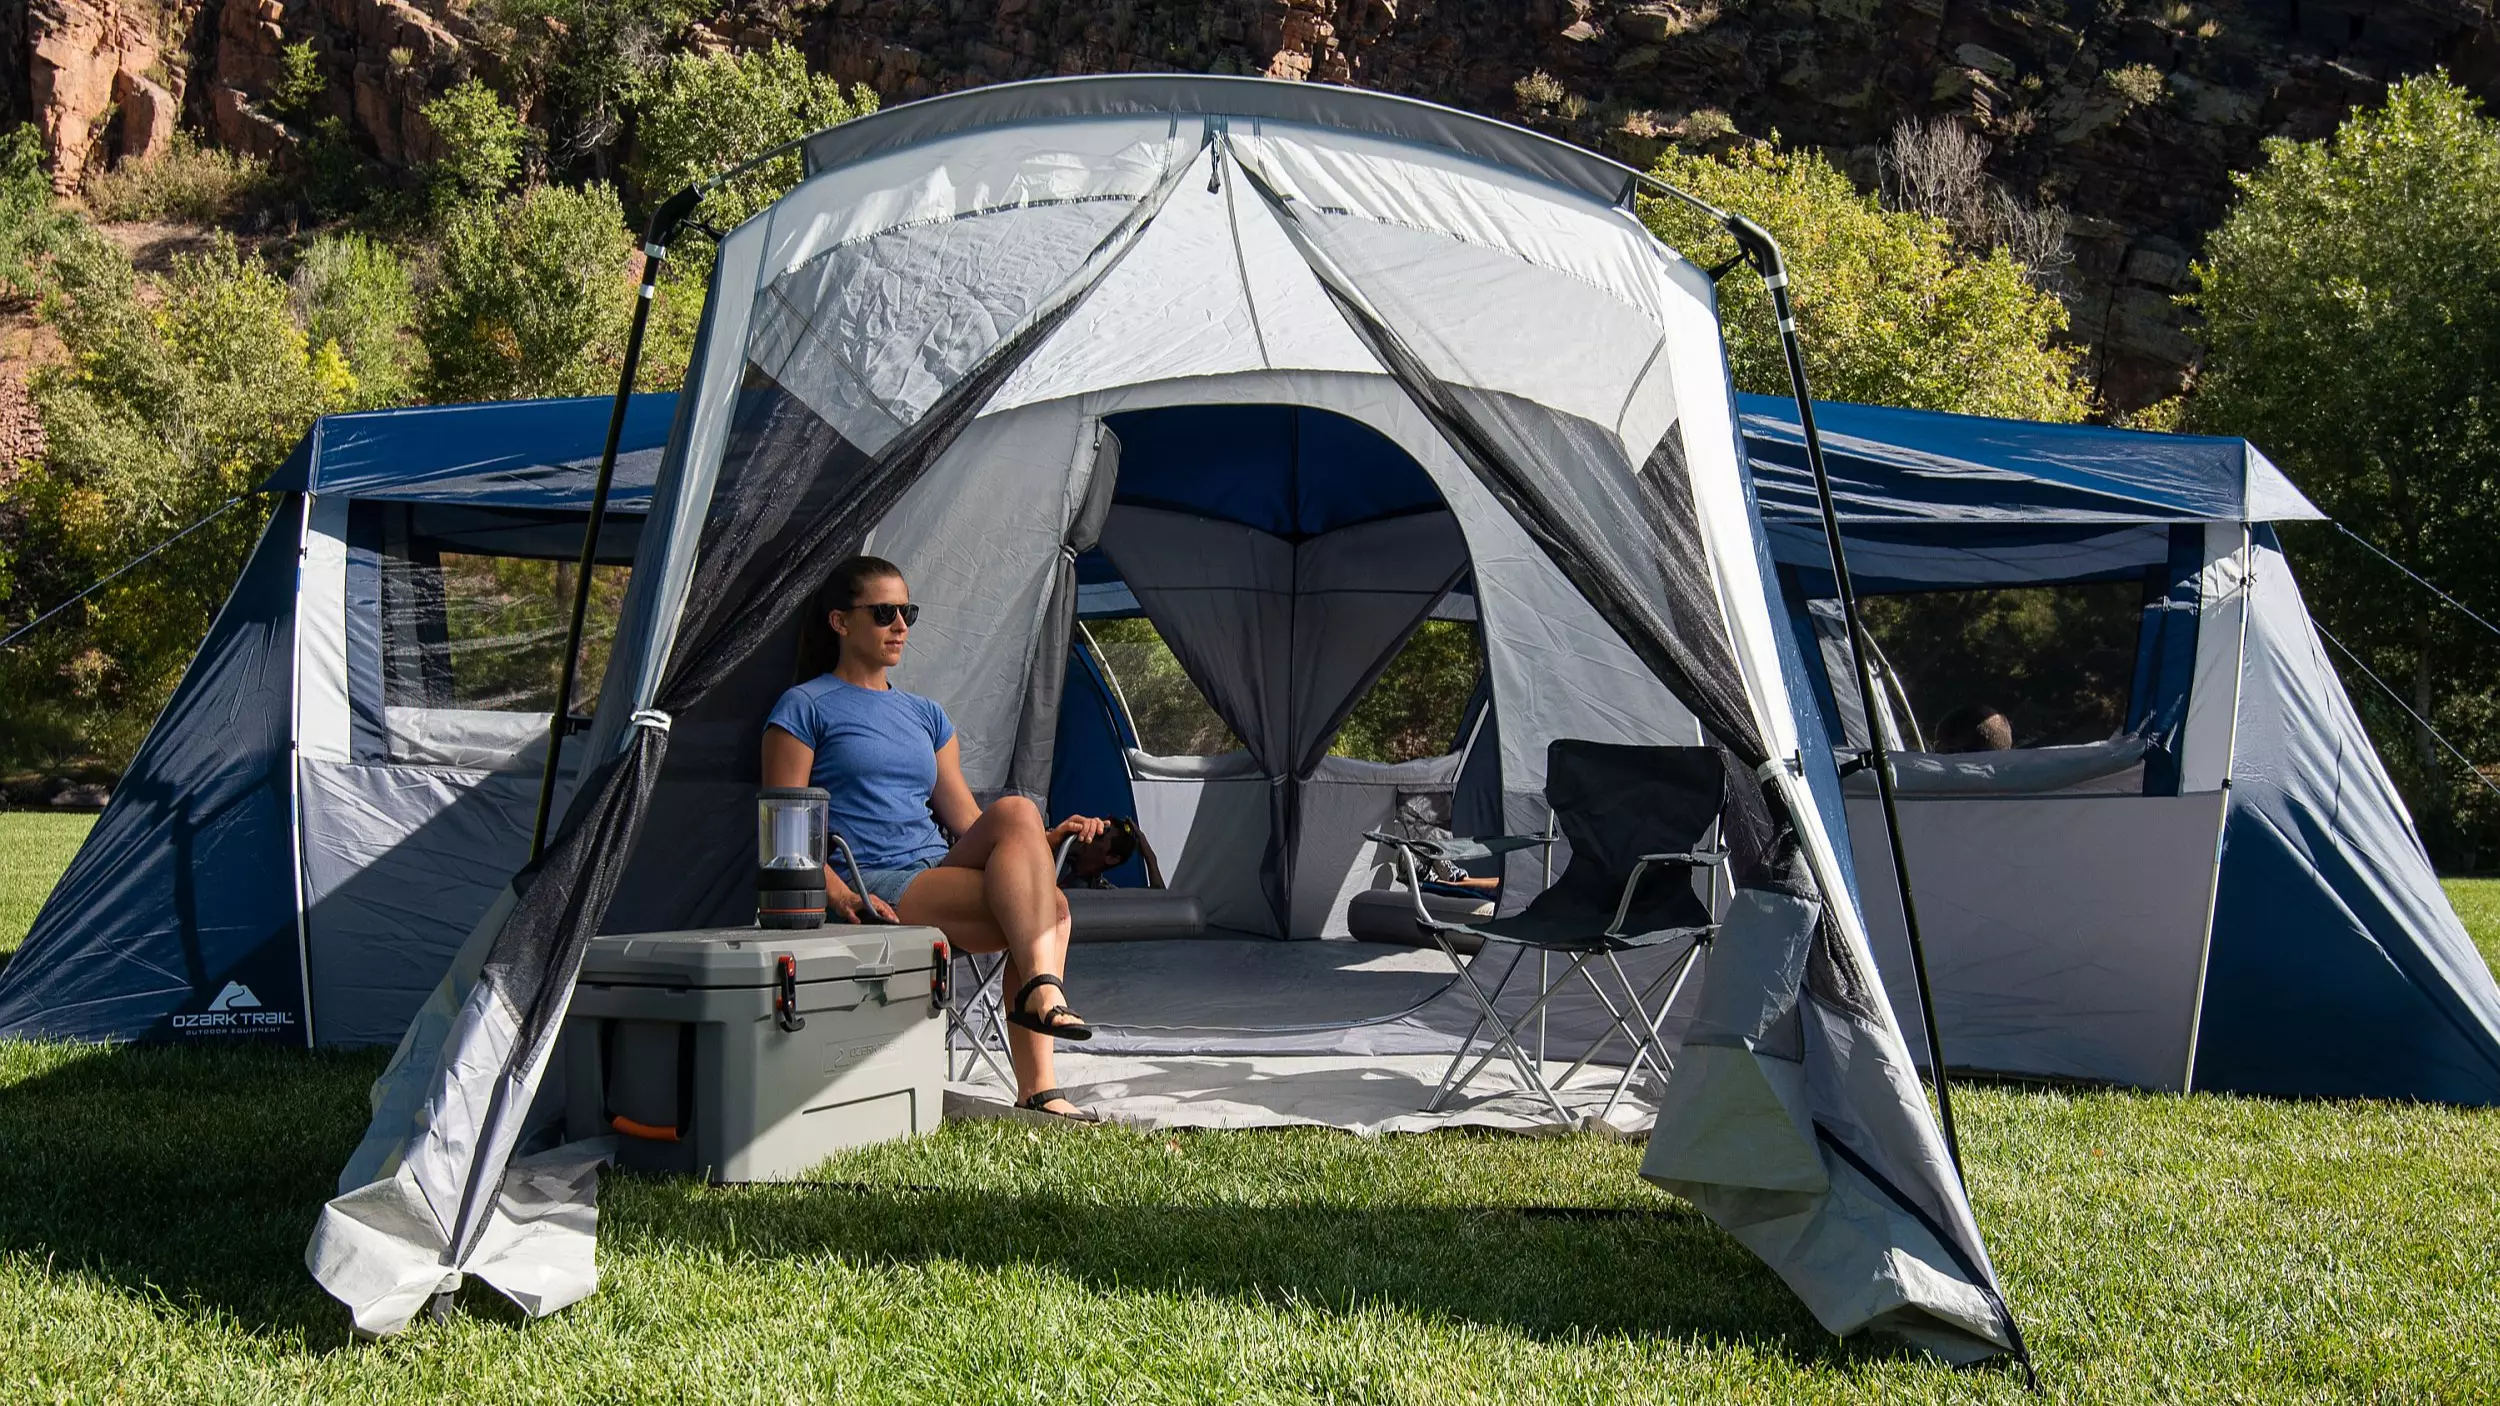 People Are Seriously Impressed By This Huge 20-Person Tent 